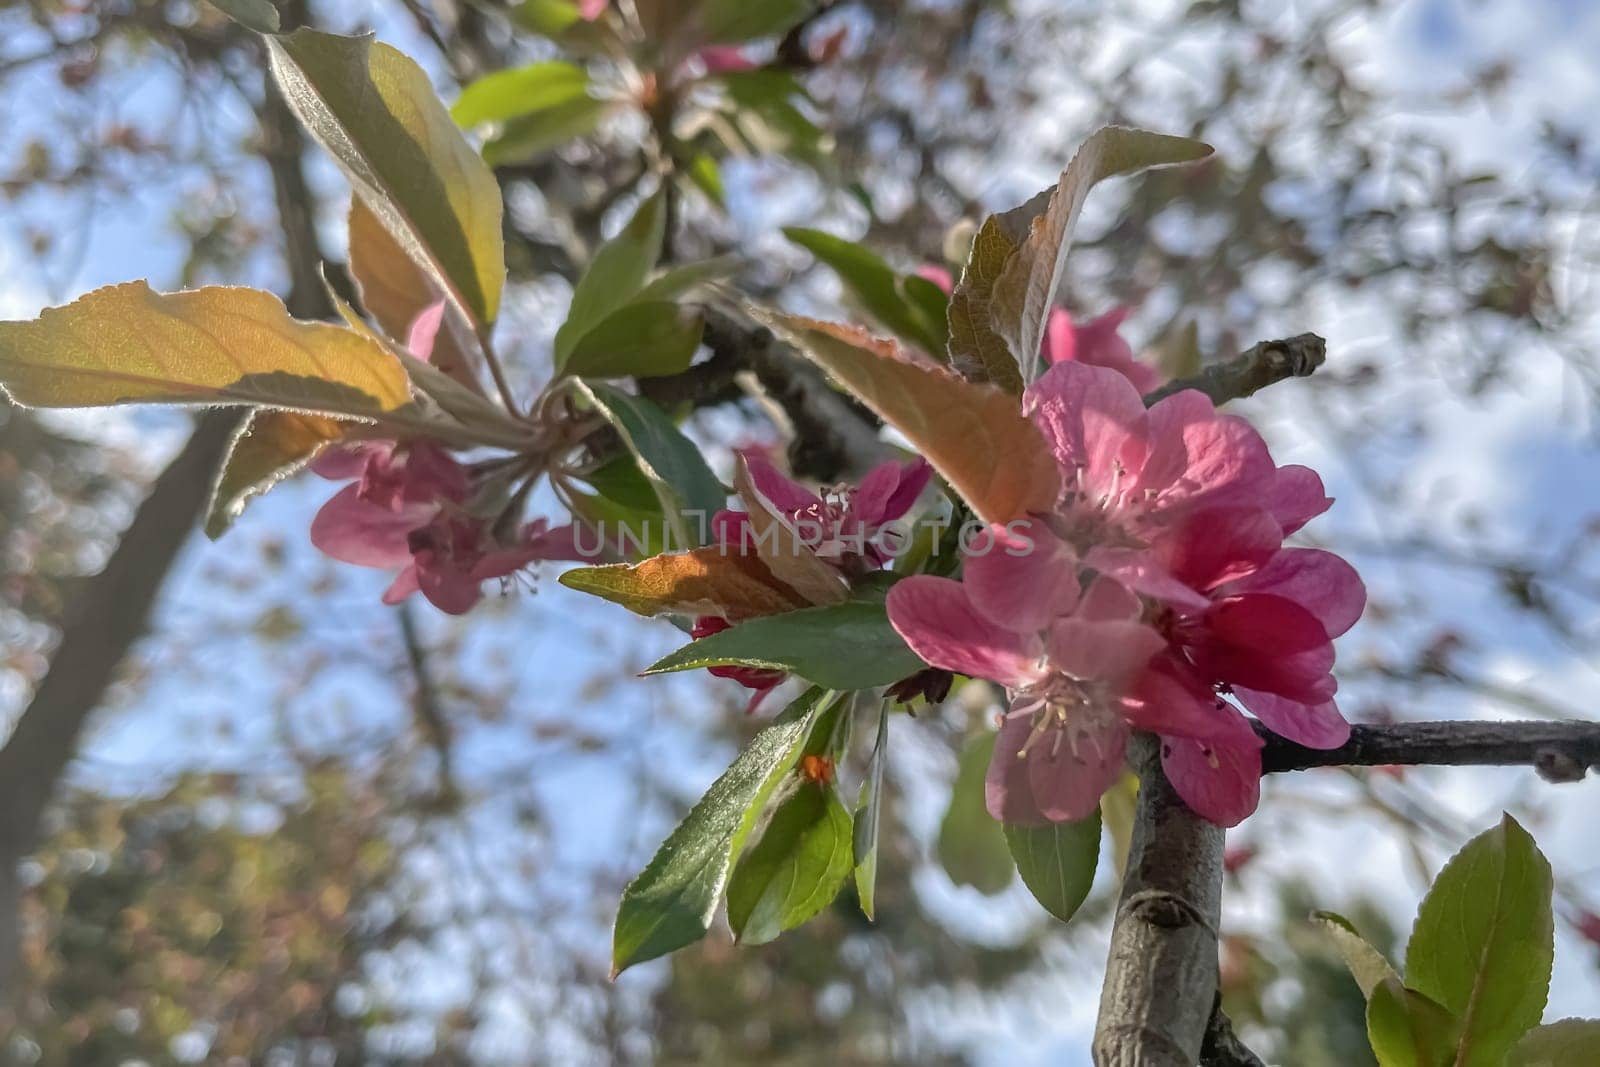 Colorful Spring. The Beauty of the Season with Blossoming Tree Branches. The Awakening of Nature. A Visual Feast Full of Blooming Tree Branches Giving the Good News of Spring.